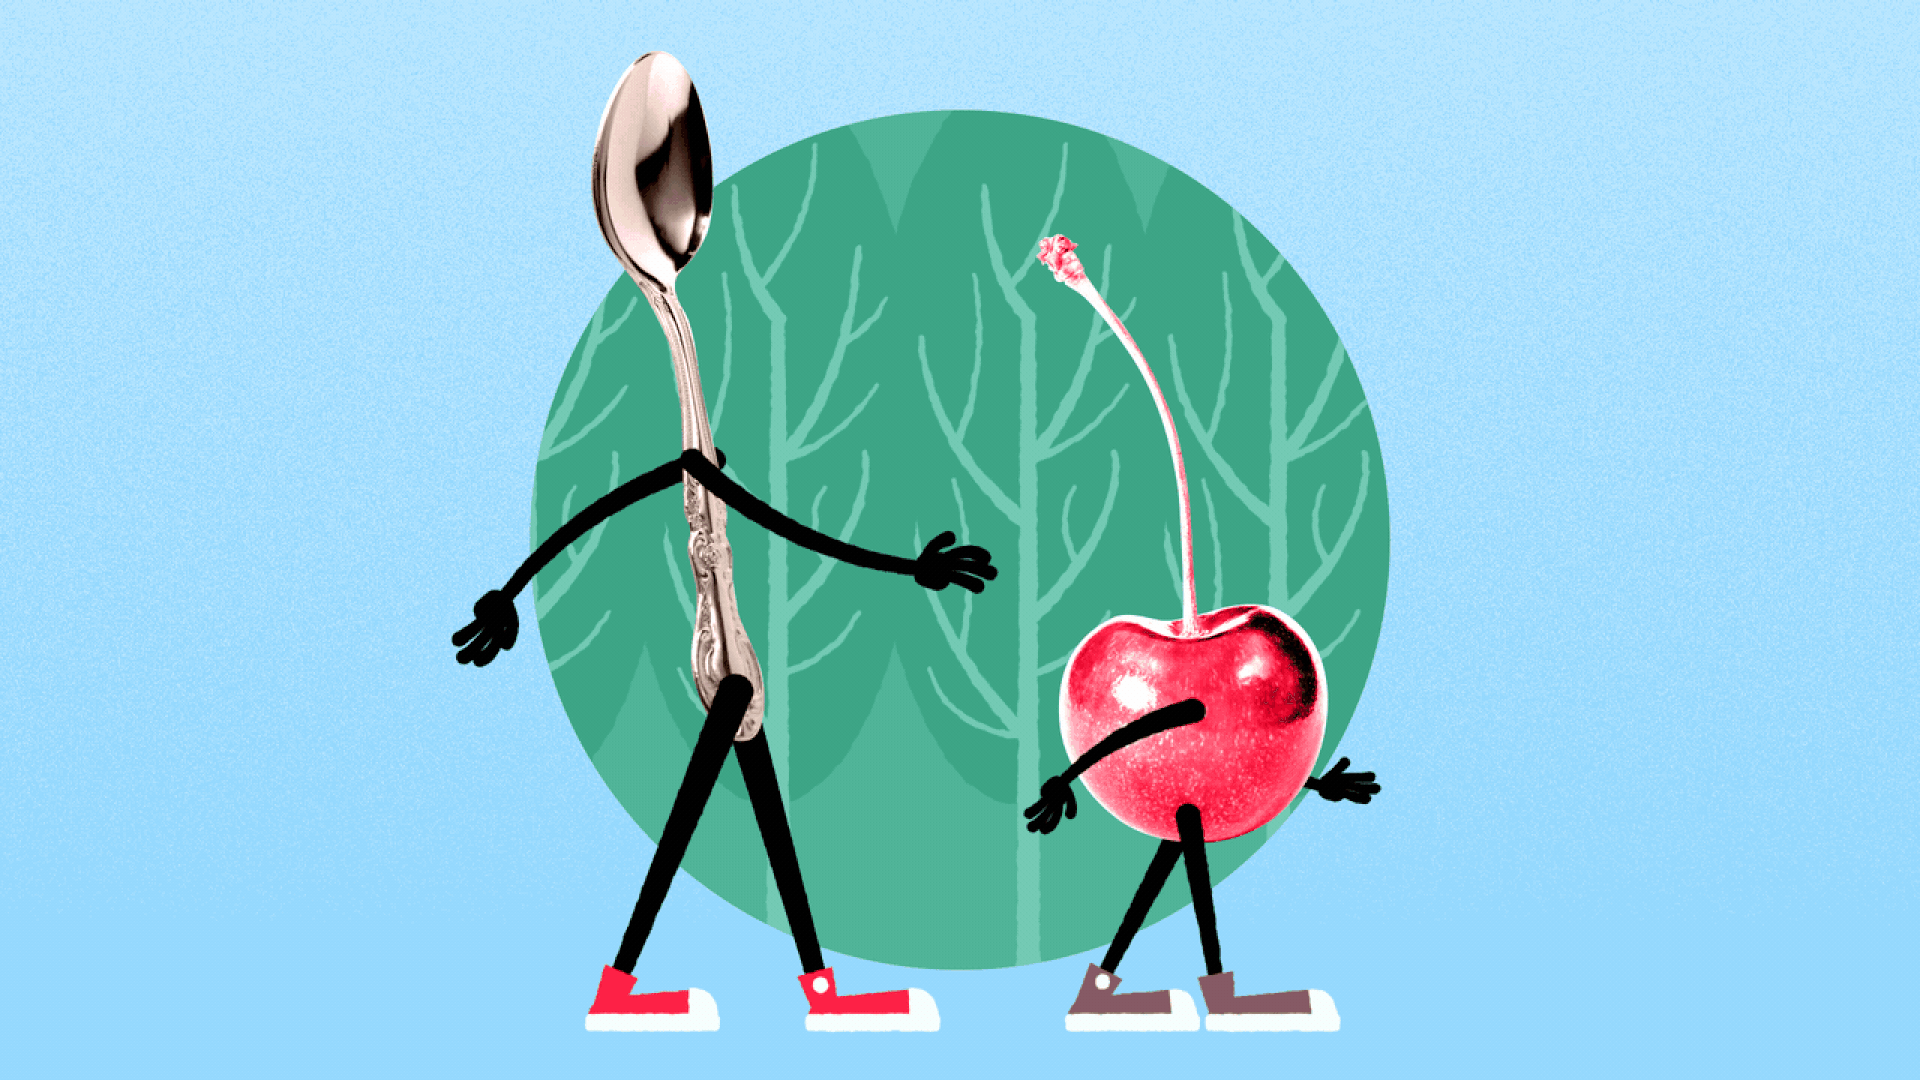 Illustration of a spoon and cherry, both with arms and legs, walking. 